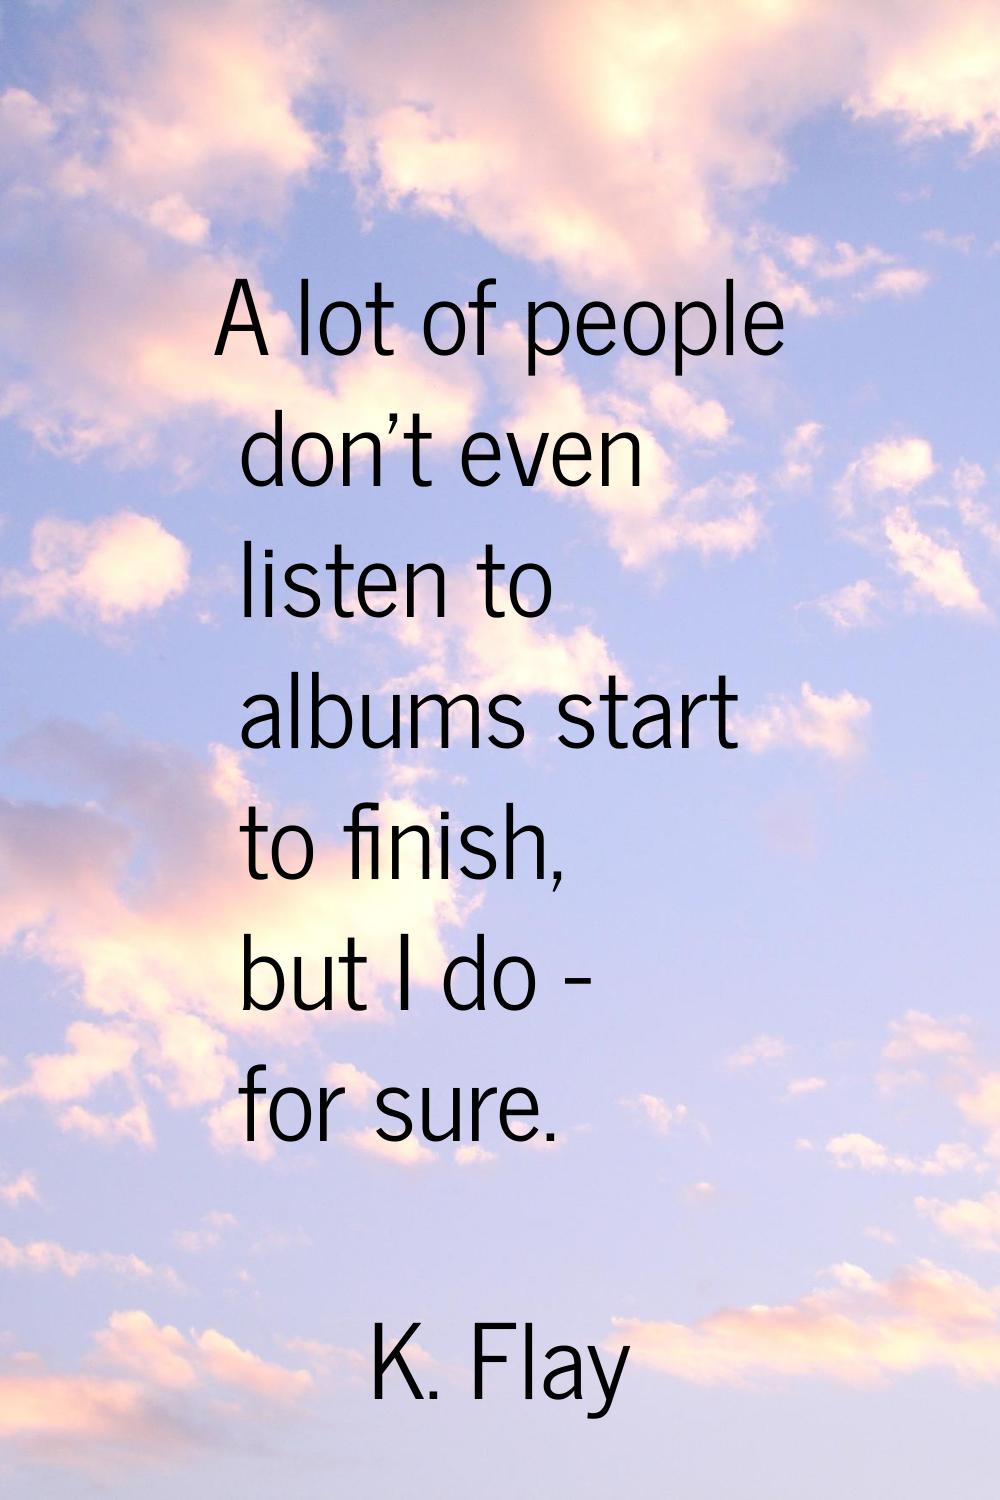 A lot of people don't even listen to albums start to finish, but I do - for sure.